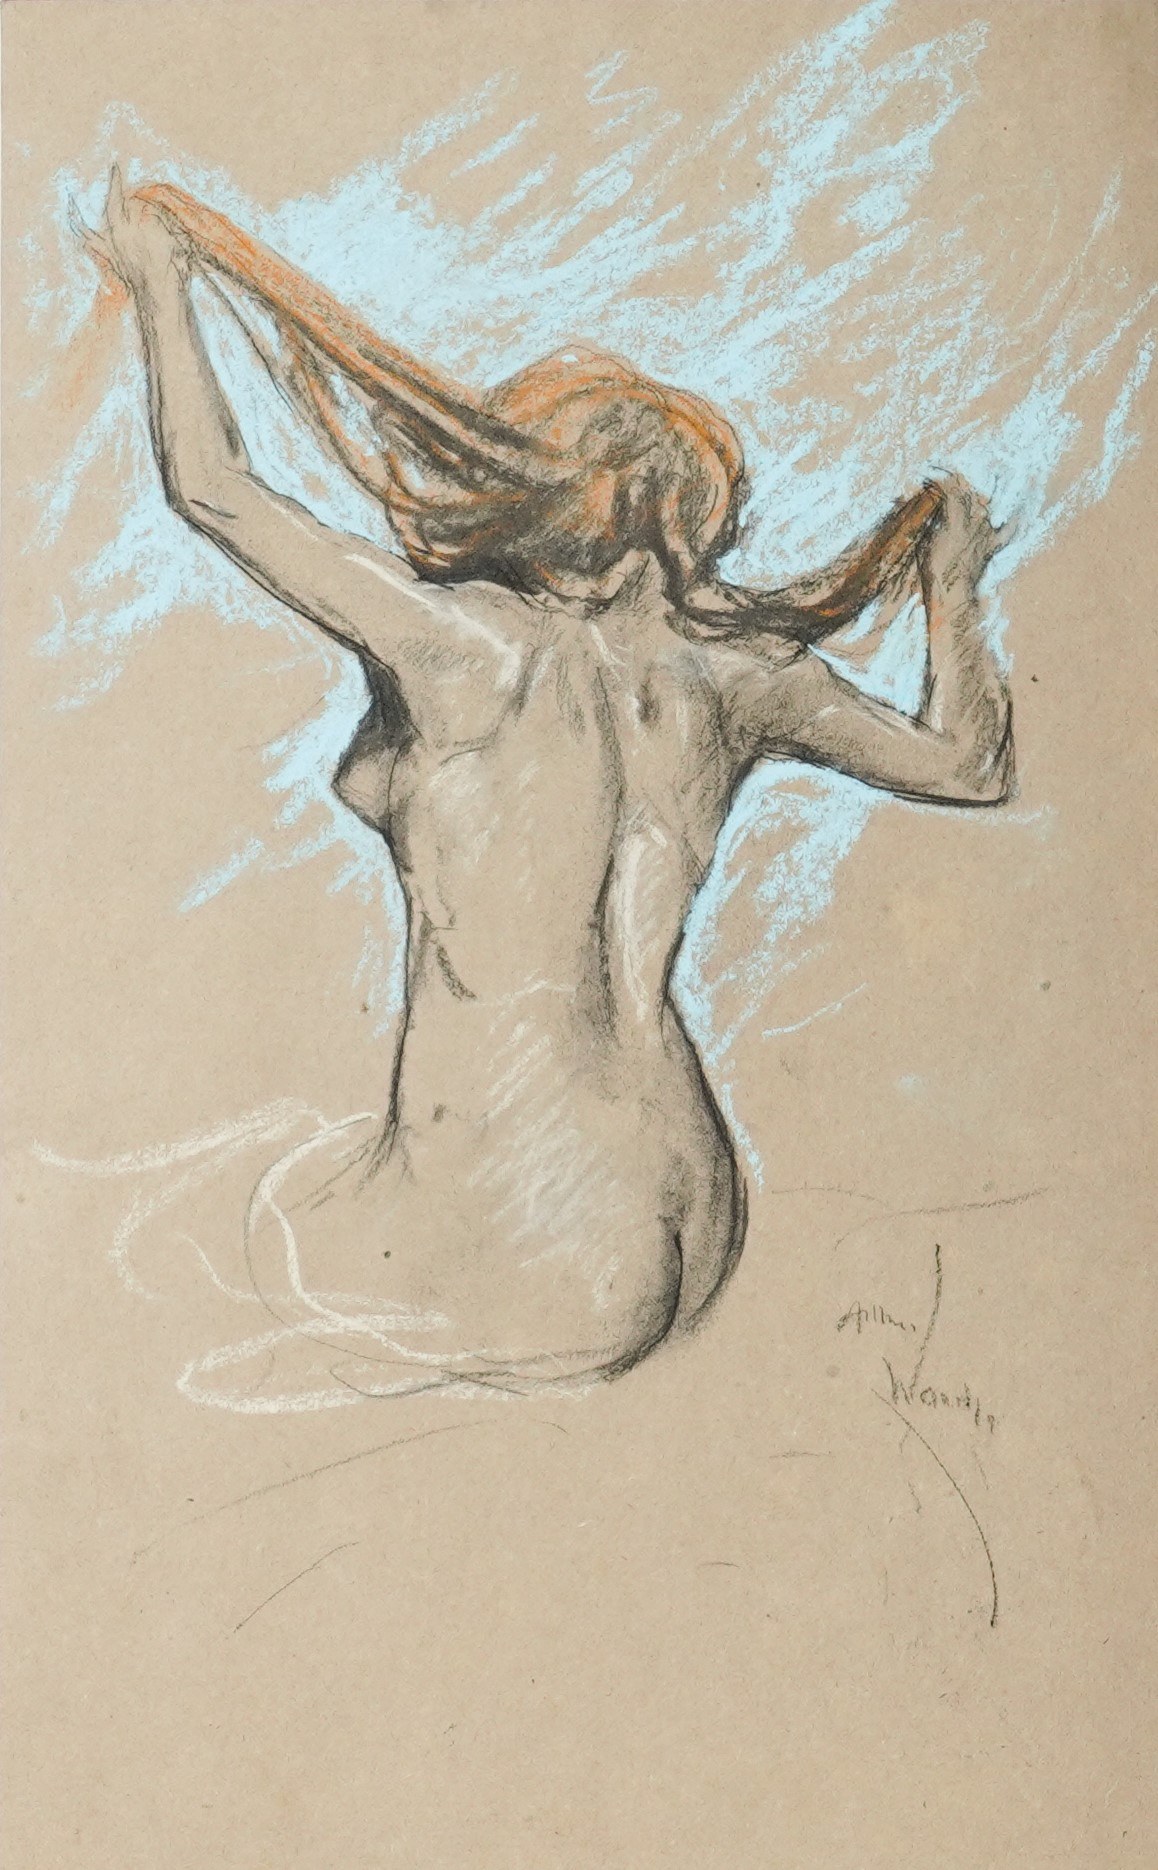 Nude study signed 'Arthur Wardle' (lower right) pastel on paper 37 x 22cm £300-500